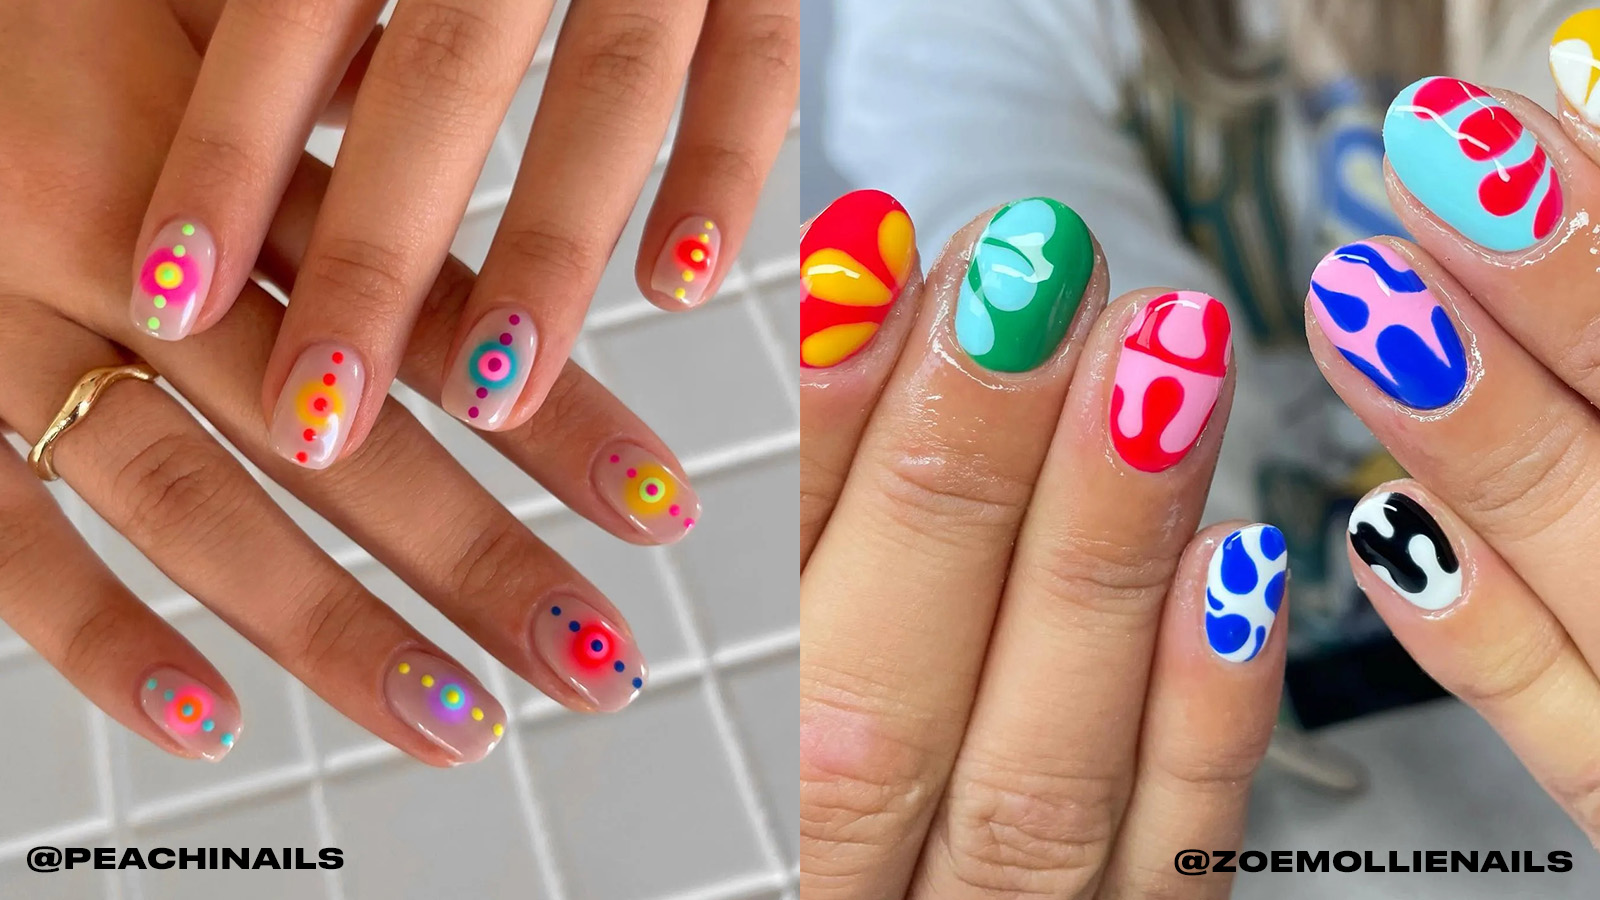 40 Summer Nail Art Designs We've Bookmarked - Beauty Bay Edited